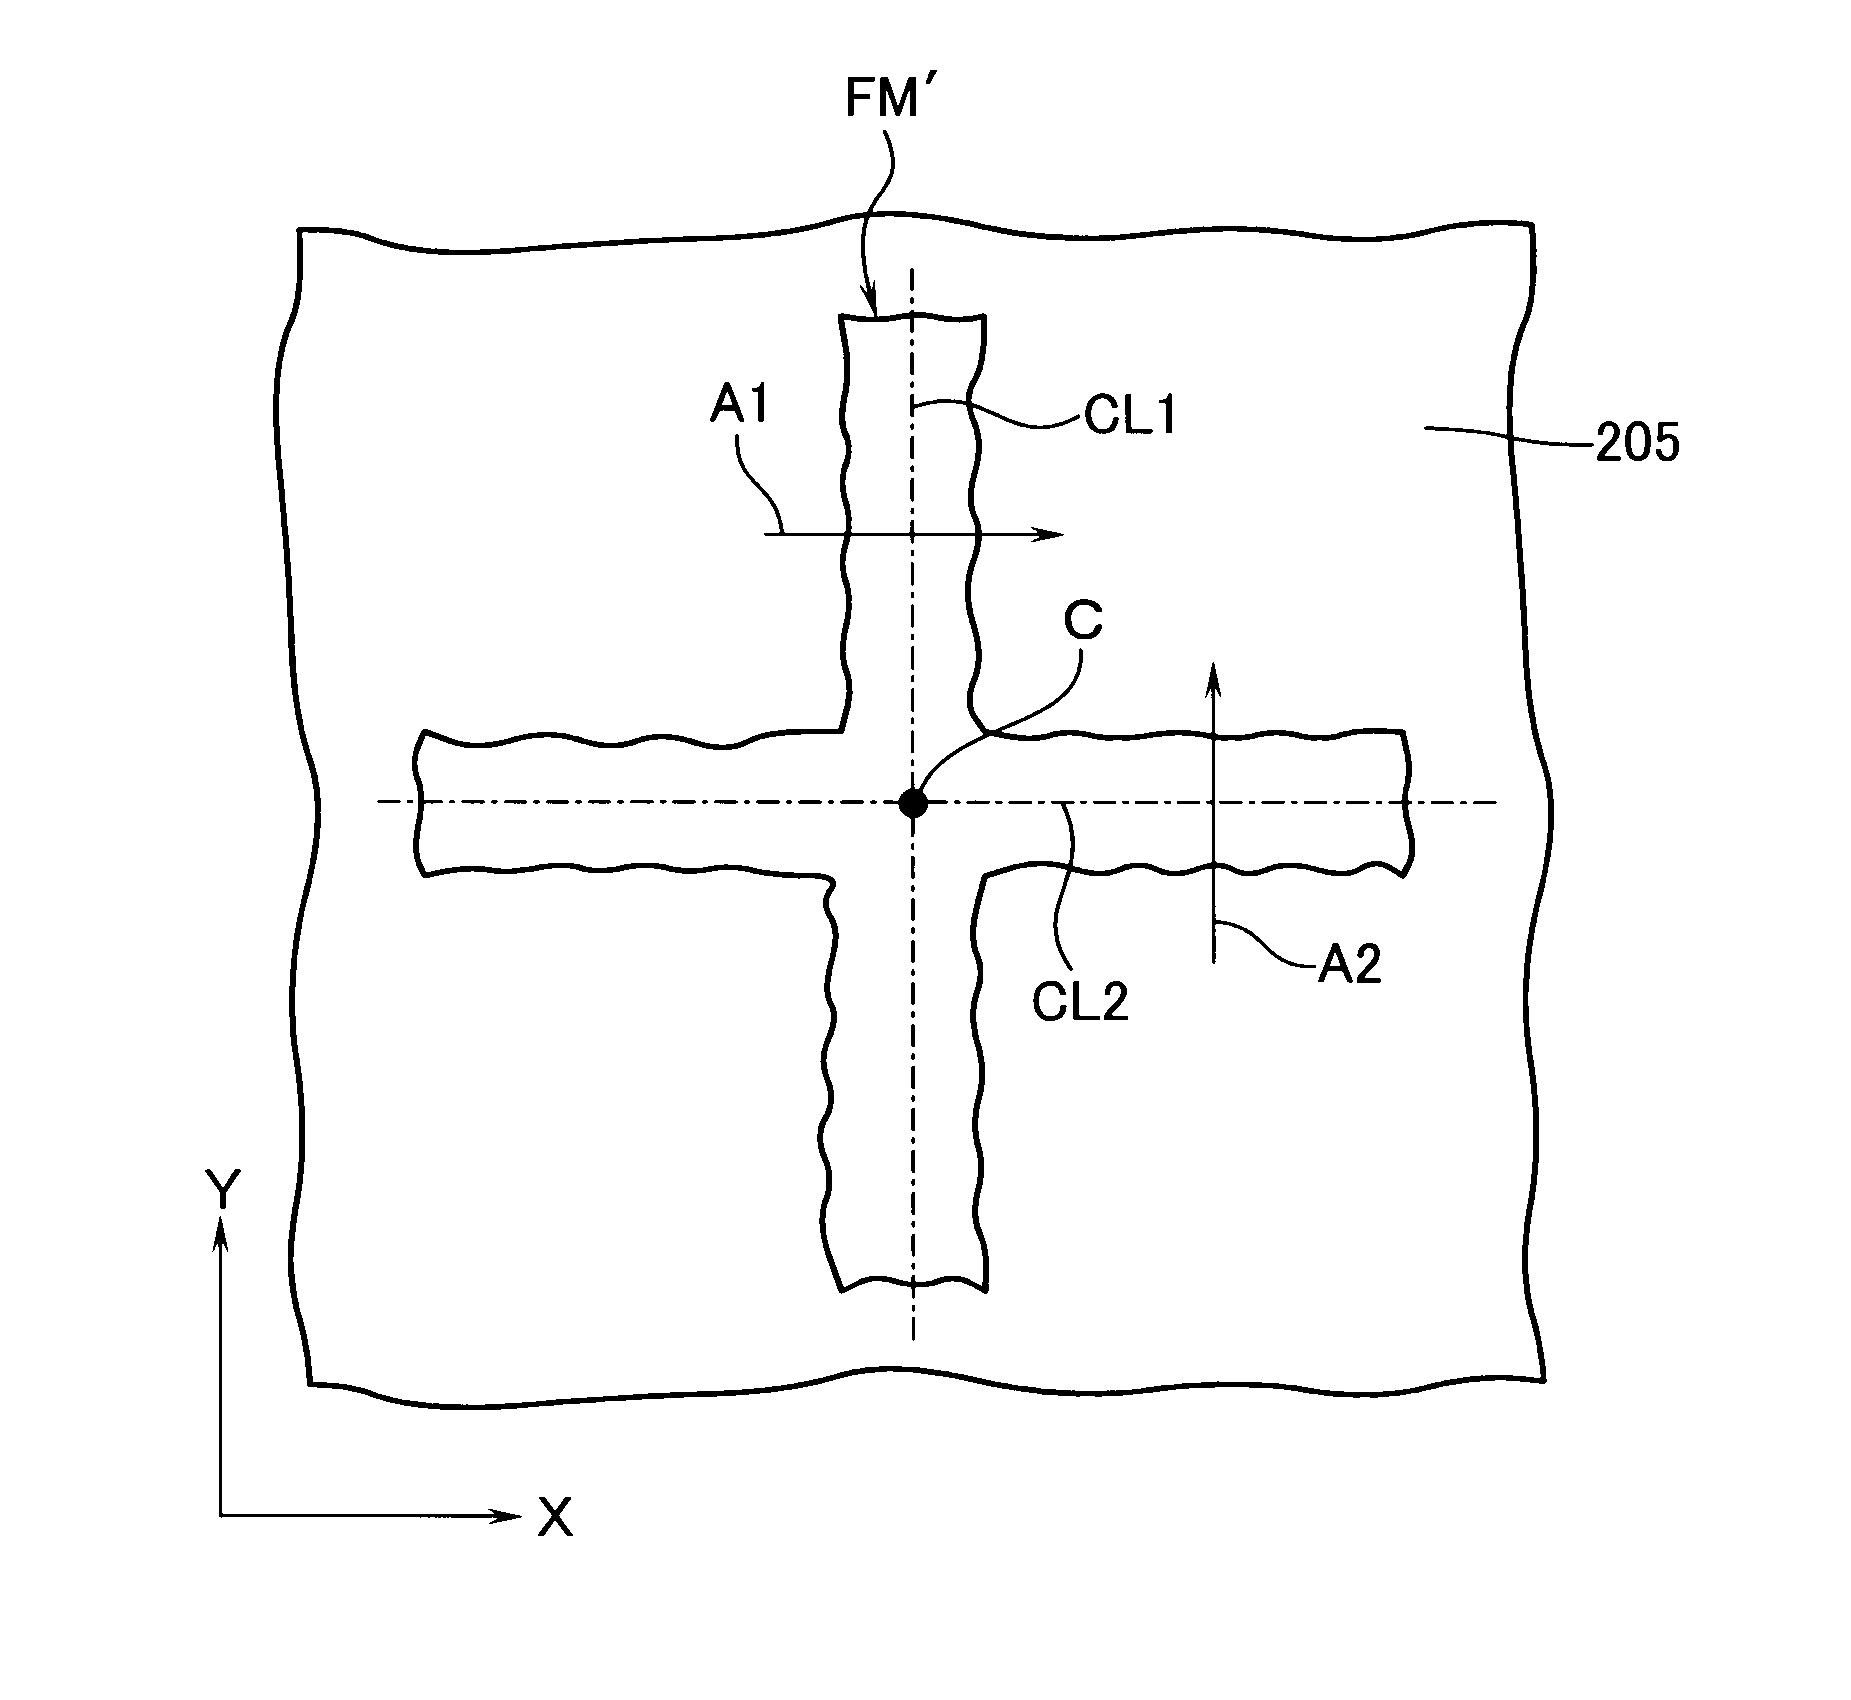 Charged particle beam writing method, method for detecting position of reference mark for charged particle beam writing, and charged particle beam writing apparatus